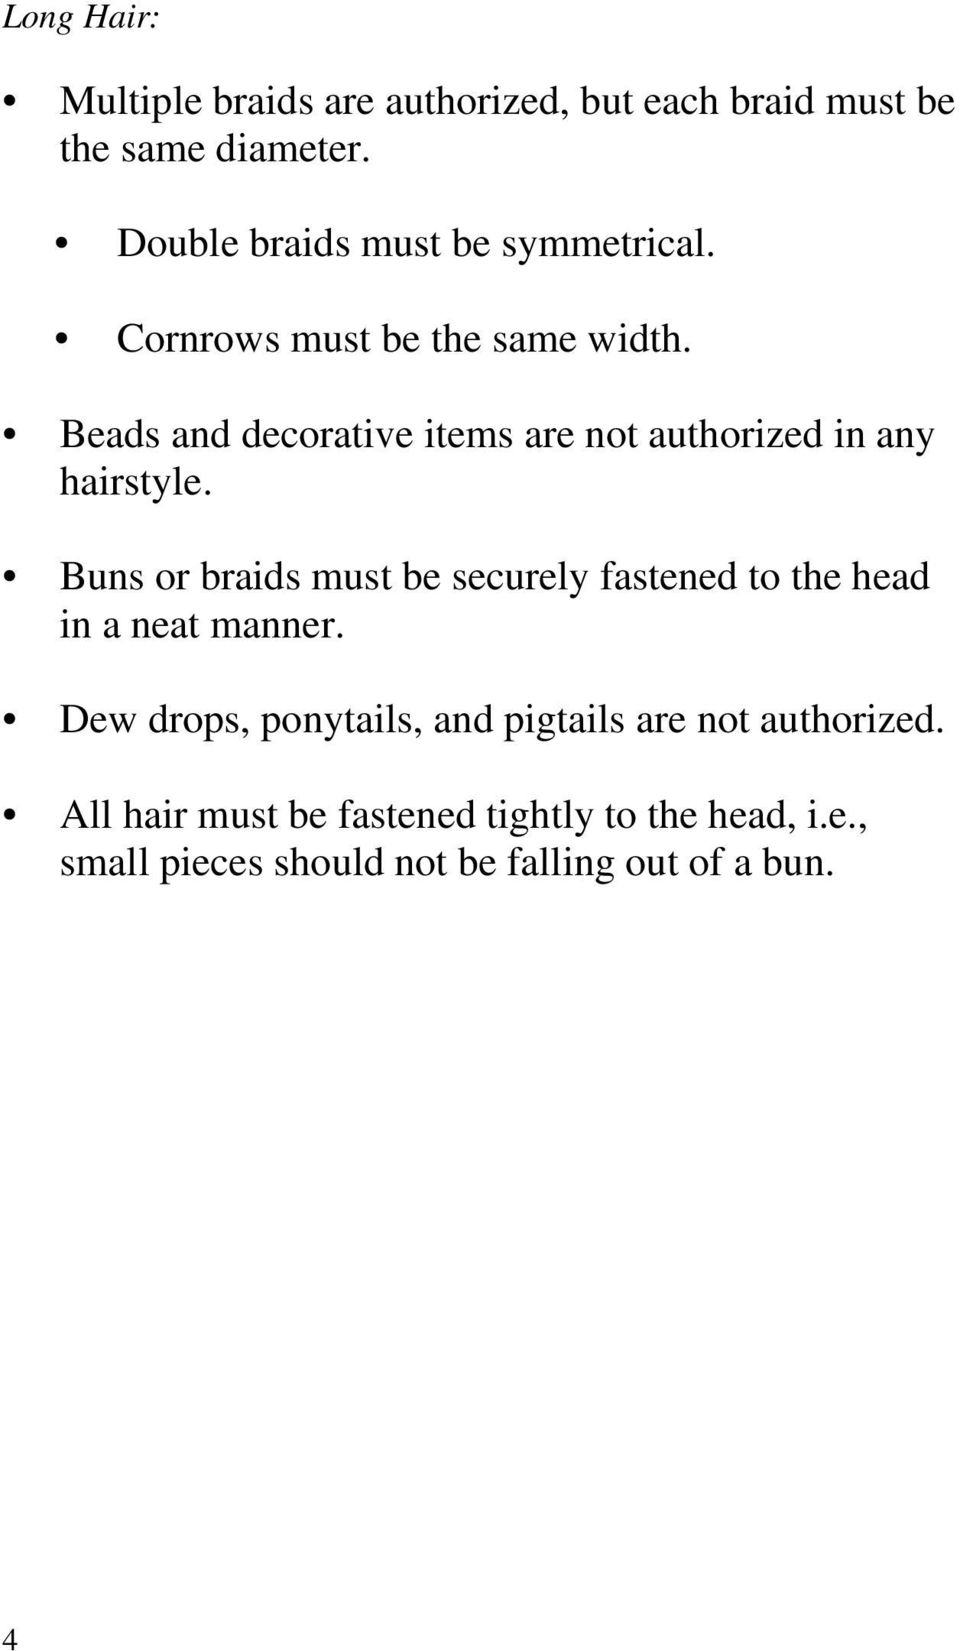 Beads and decorative items are not authorized in any hairstyle.